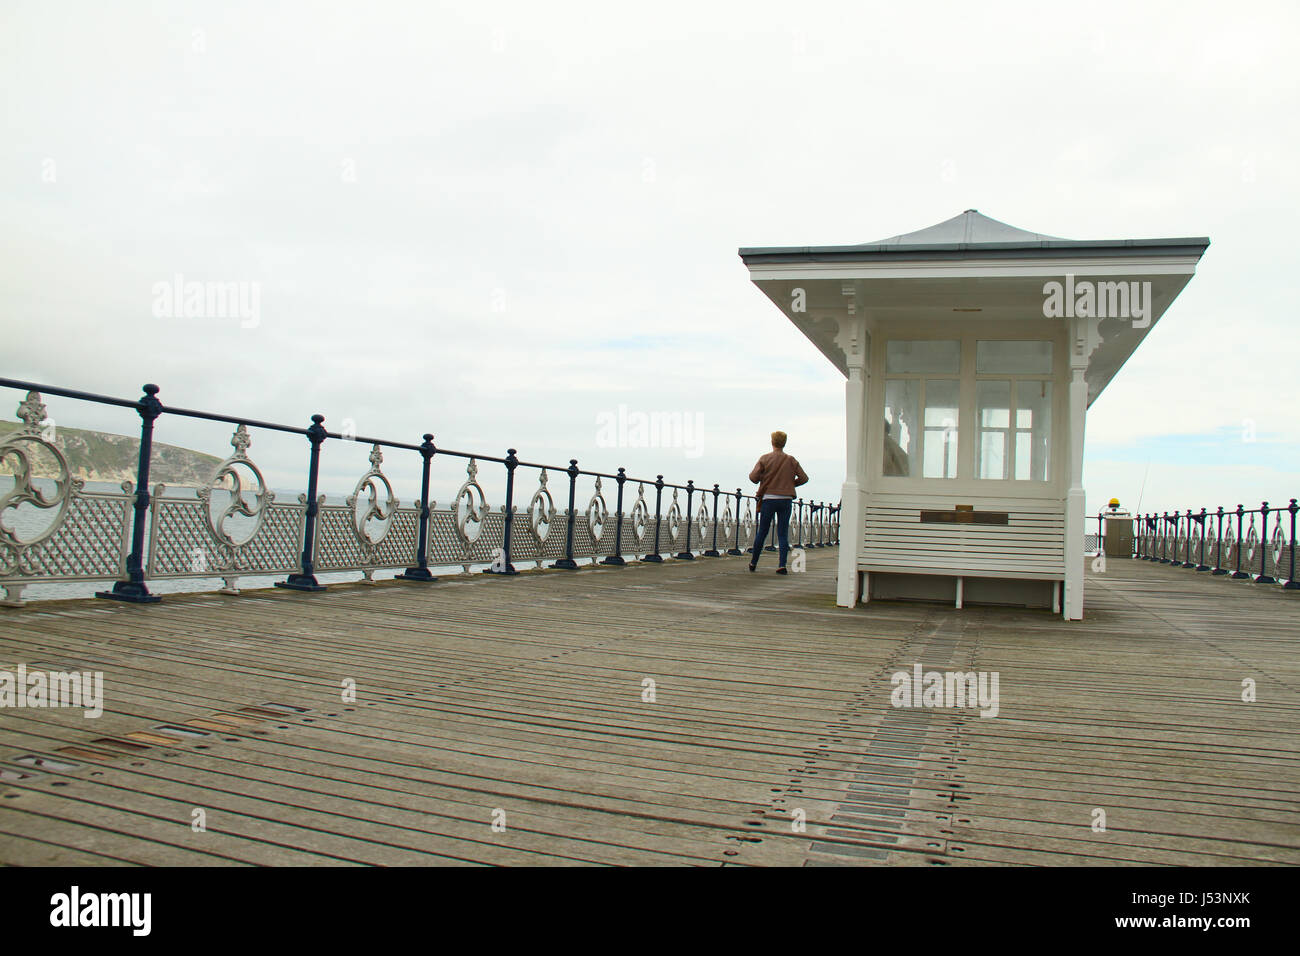 Swanage, UK -  12 May: A tourist seen on the Swanage Pier. General view of ​the seaside town of ​ Swanage​ in Dorset, England.​  © David Mbiyu/Alamy Live News Stock Photo